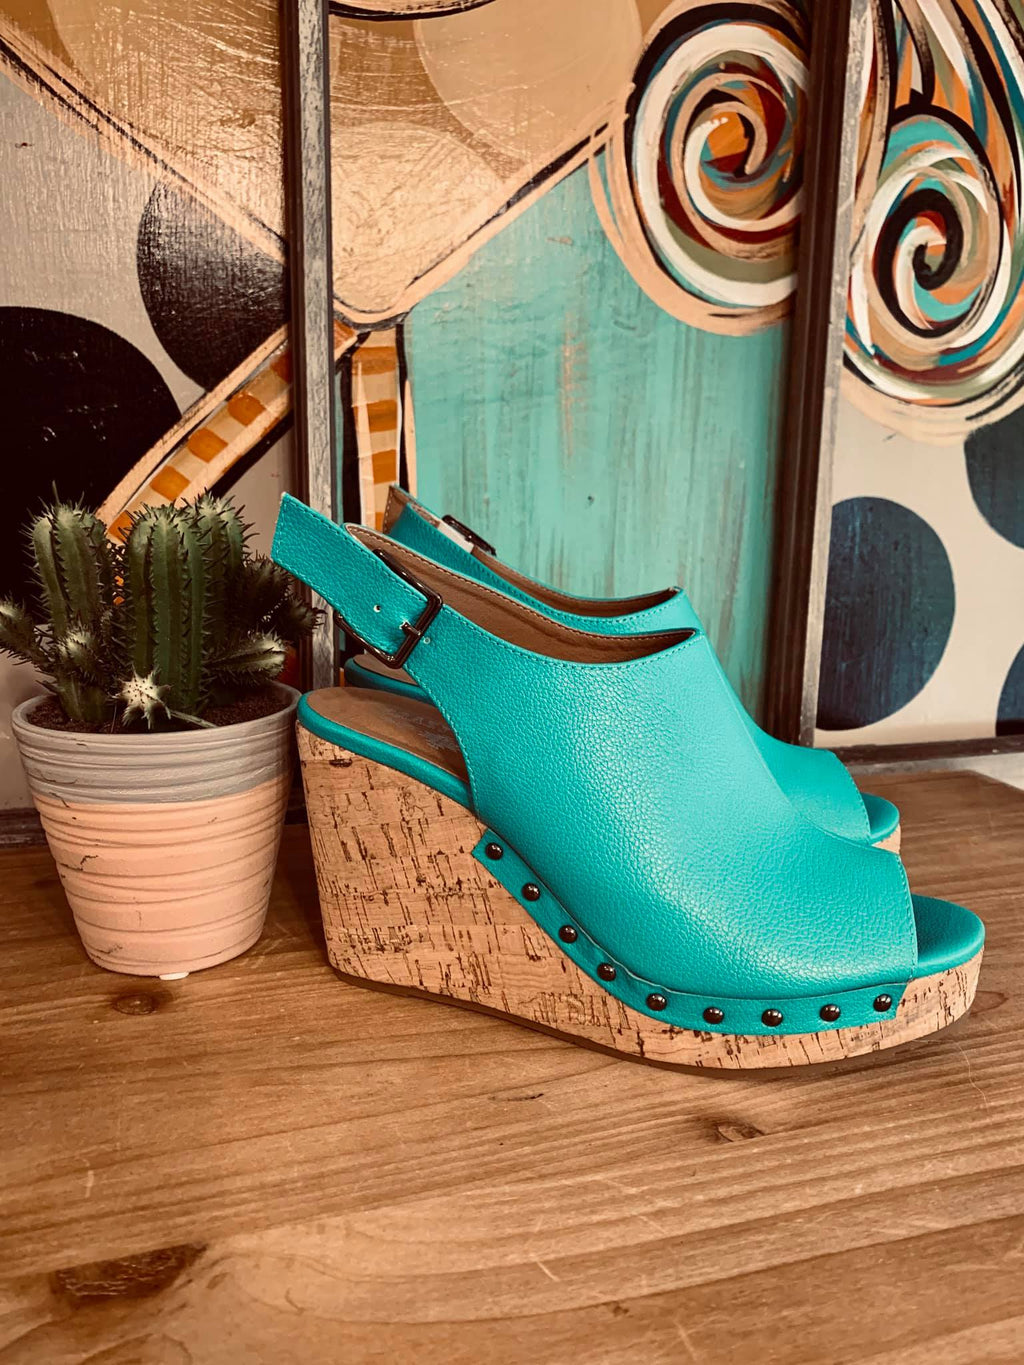 turquoise wedges